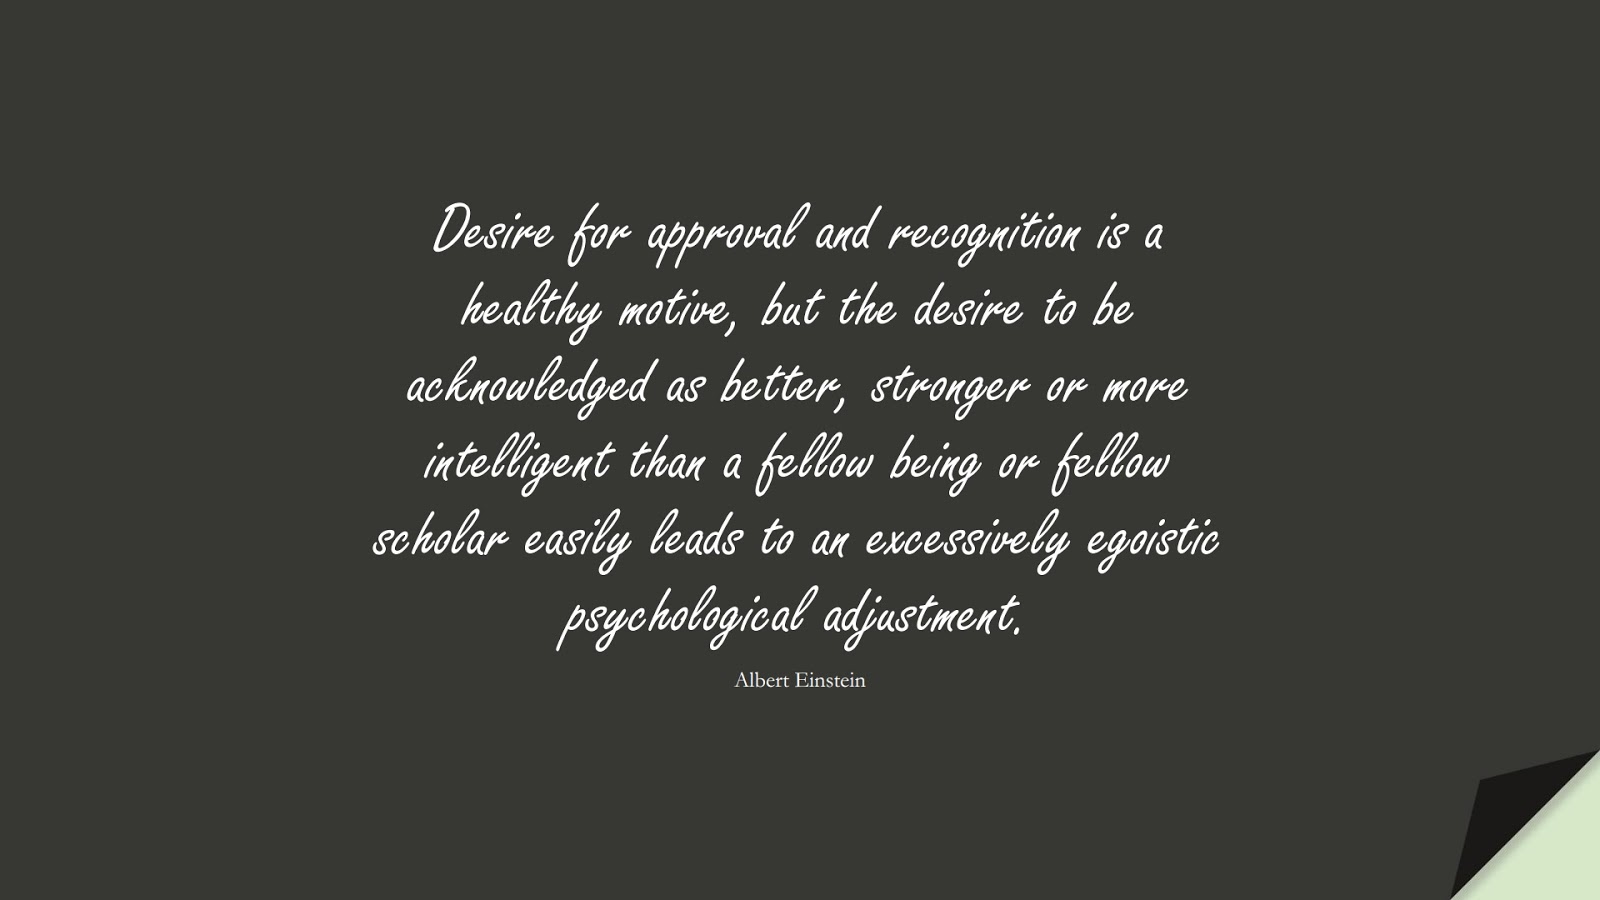 Desire for approval and recognition is a healthy motive, but the desire to be acknowledged as better, stronger or more intelligent than a fellow being or fellow scholar easily leads to an excessively egoistic psychological adjustment. (Albert Einstein);  #AlbertEnsteinQuotes